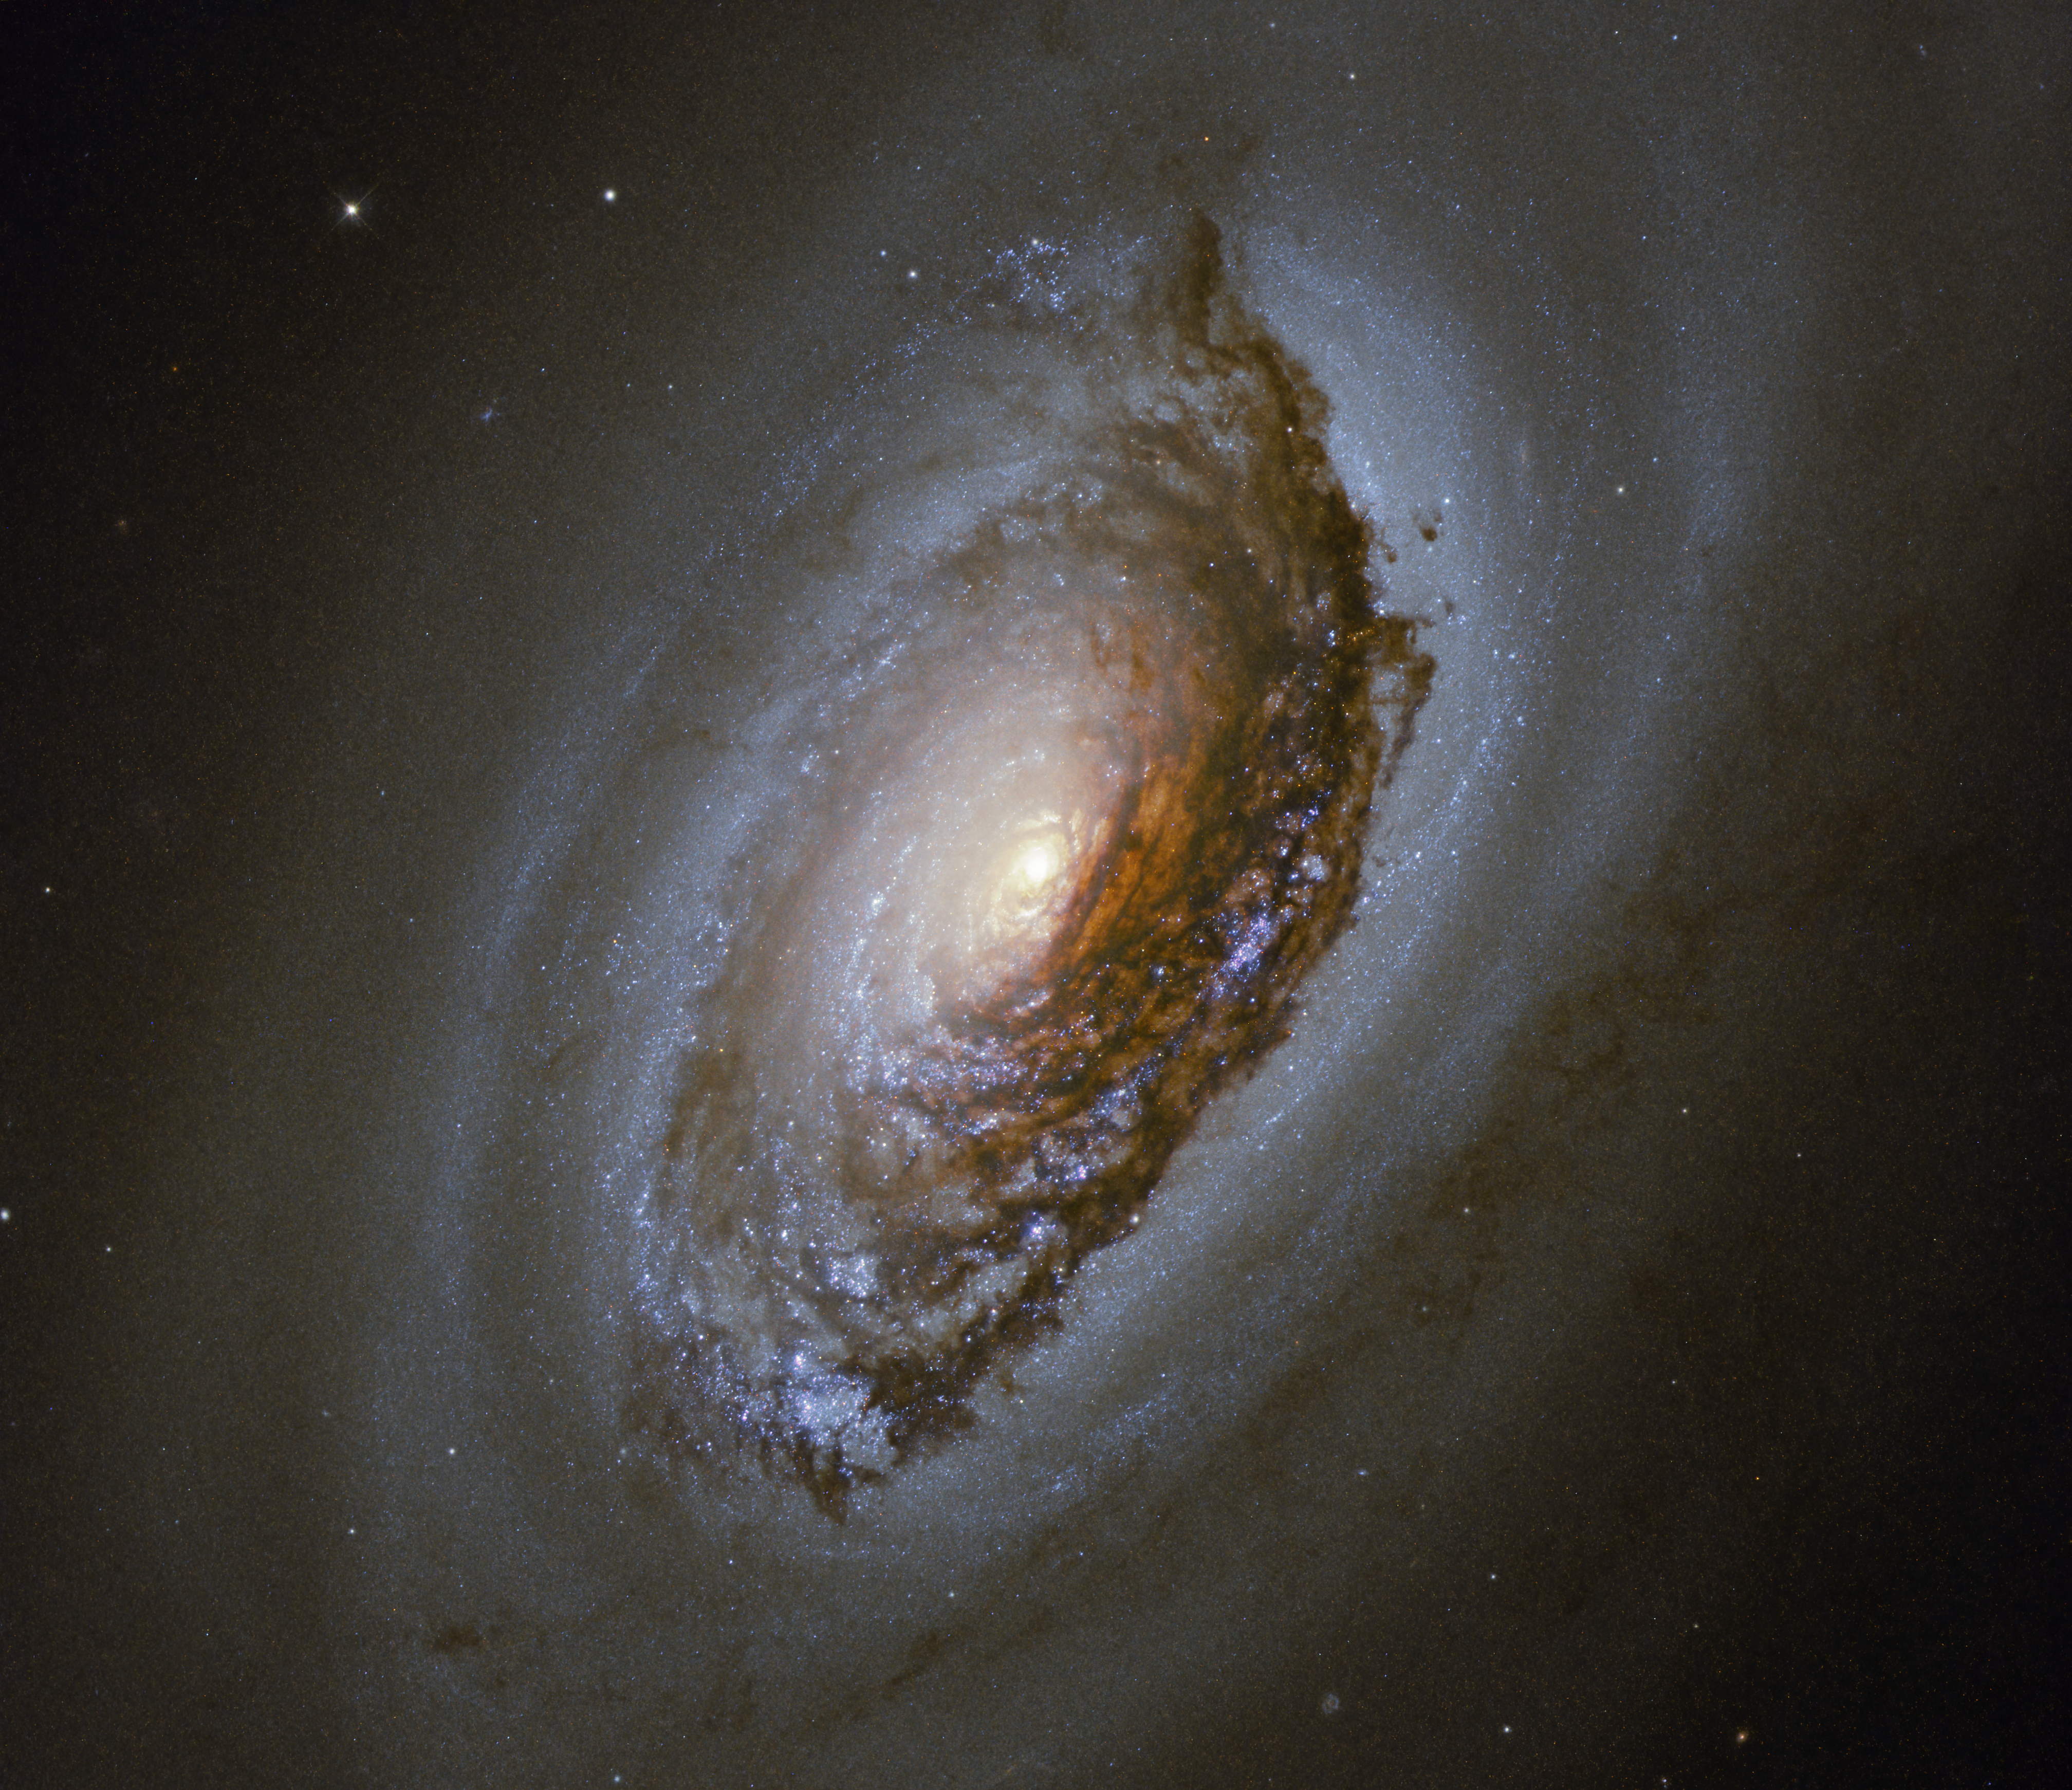 A swirling dense galaxy with thick dust clouds surrounds a central region of older yellow stars whose front half appears darker, resembling a black eye.